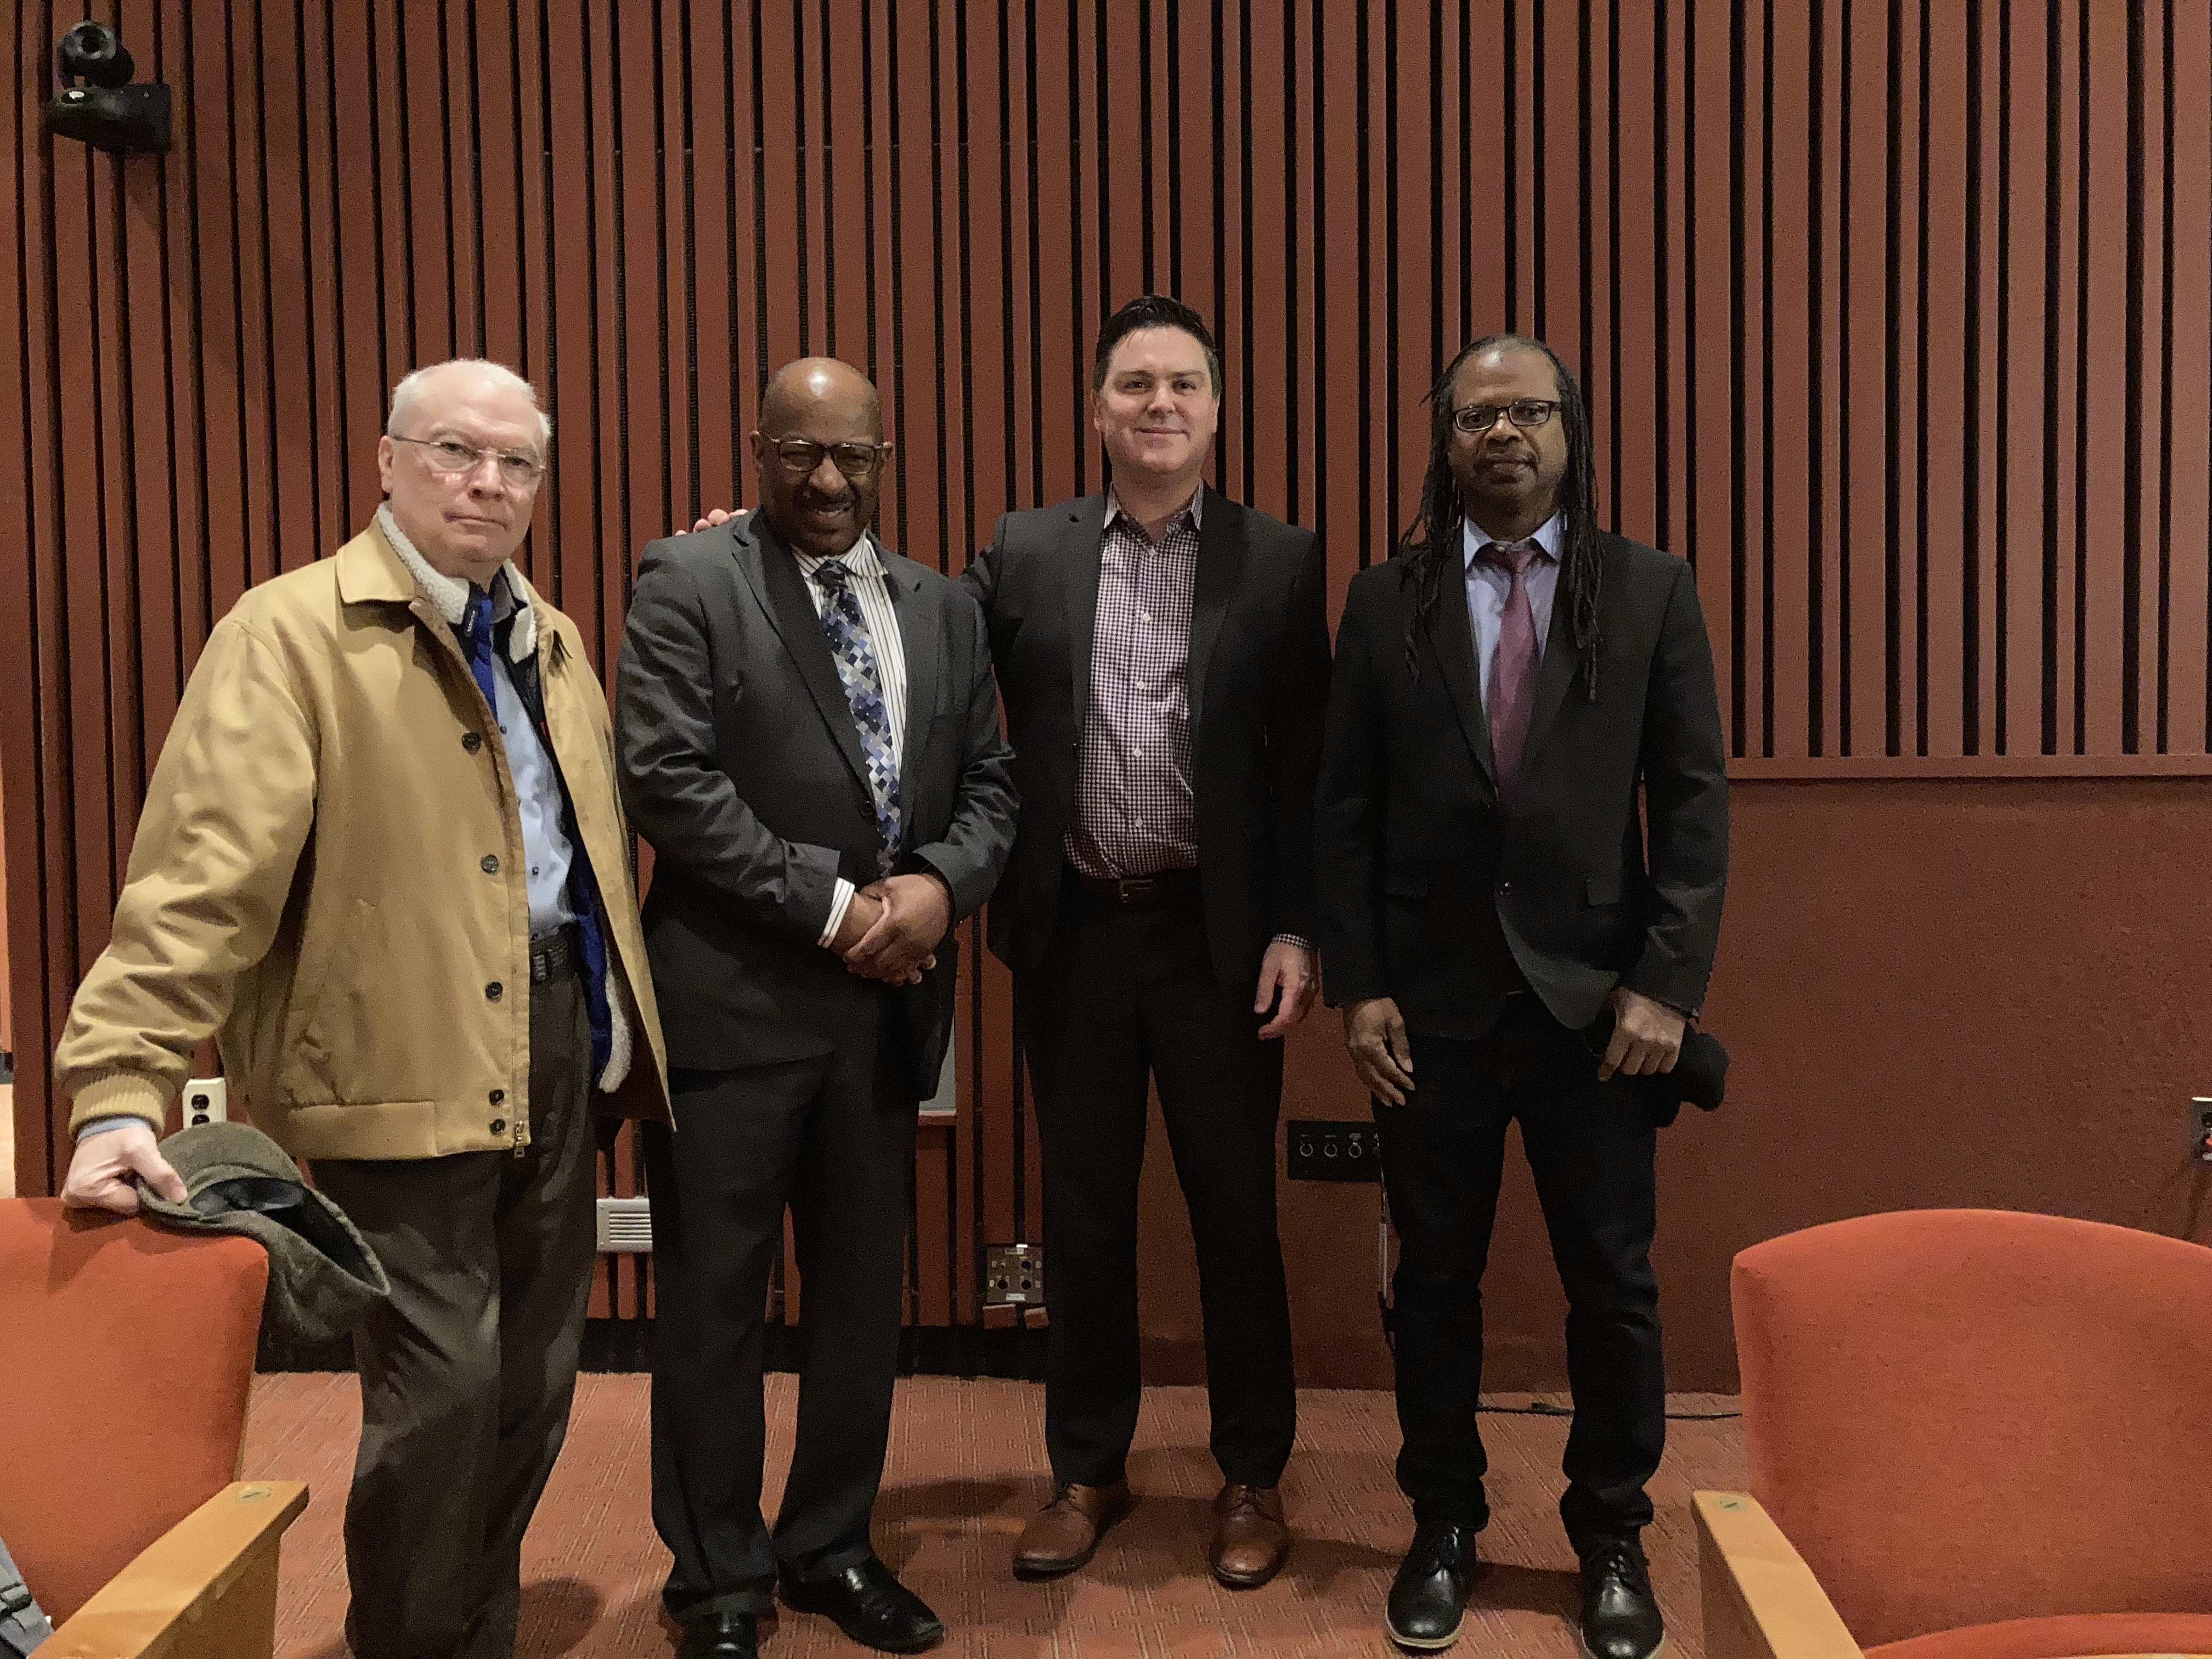 IN THE PHOTO (from left): Prof. Kenneth Sloan, Dr. Timothy Harper, School of Management Interim Dean James Snyder, and Prof. Vernon Murray